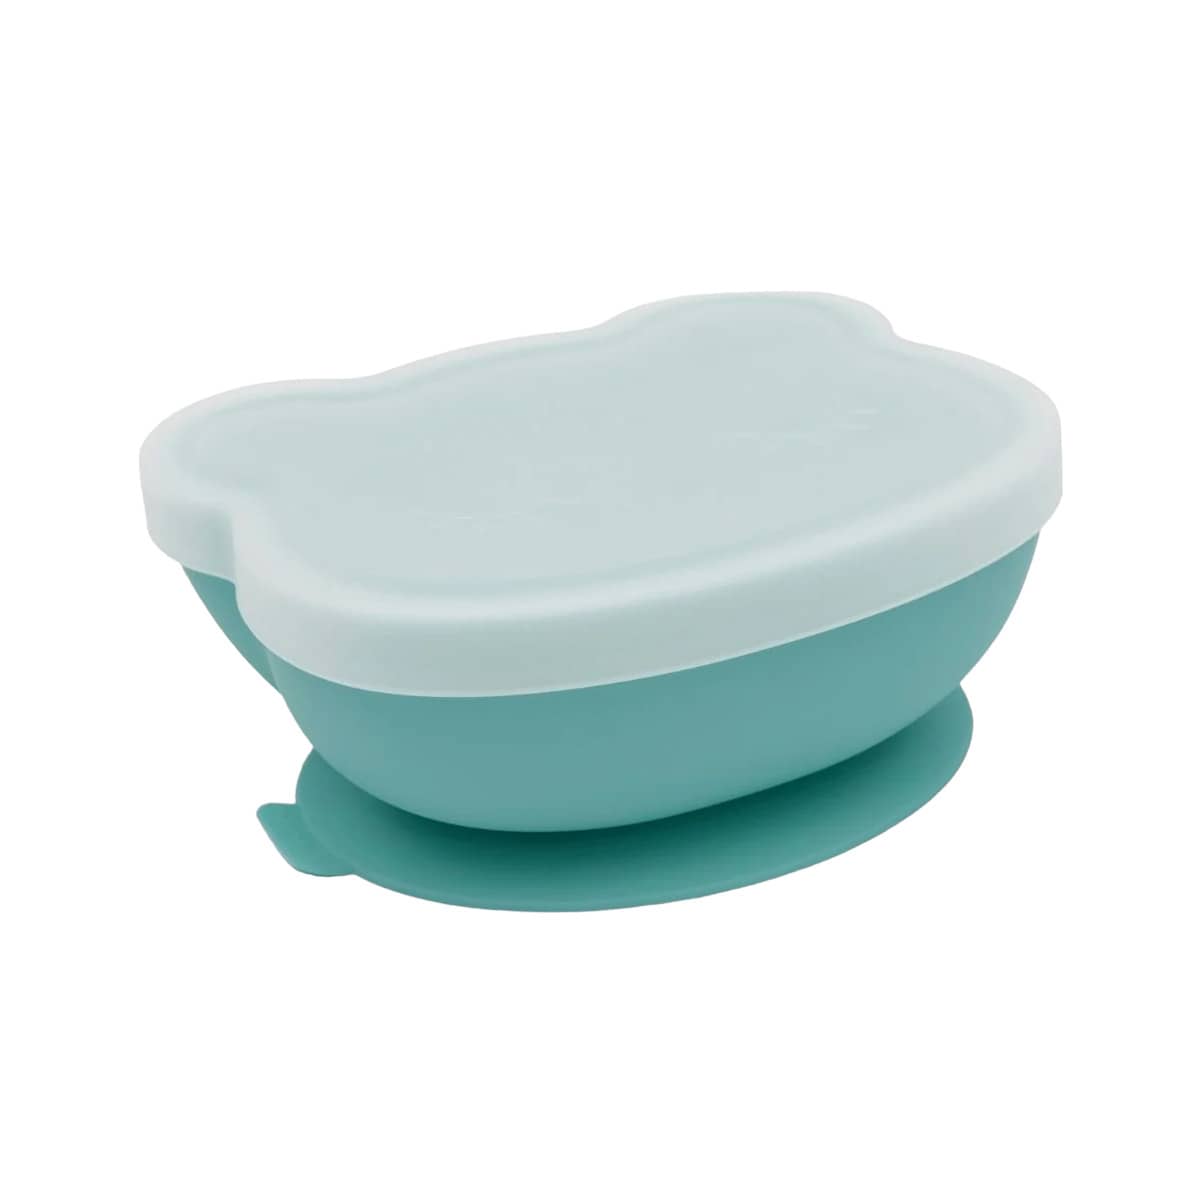 We Might Be Tiny Stickie Silicone Bowl - Pistachio